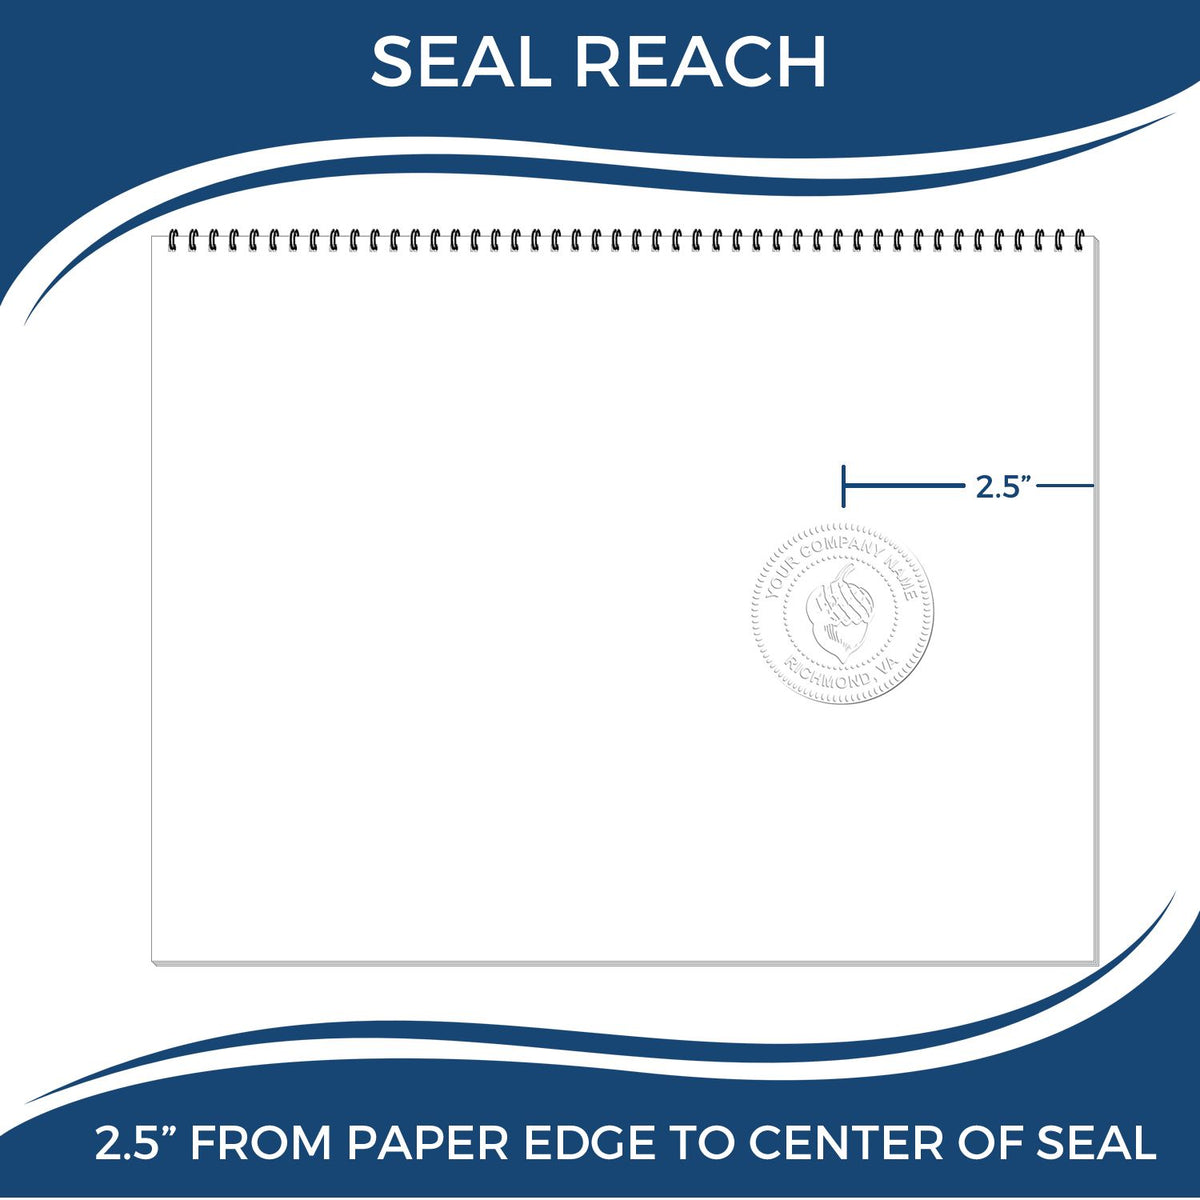 An infographic showing the seal reach which is represented by a ruler and a miniature seal image of the State of Alaska Long Reach Architectural Embossing Seal